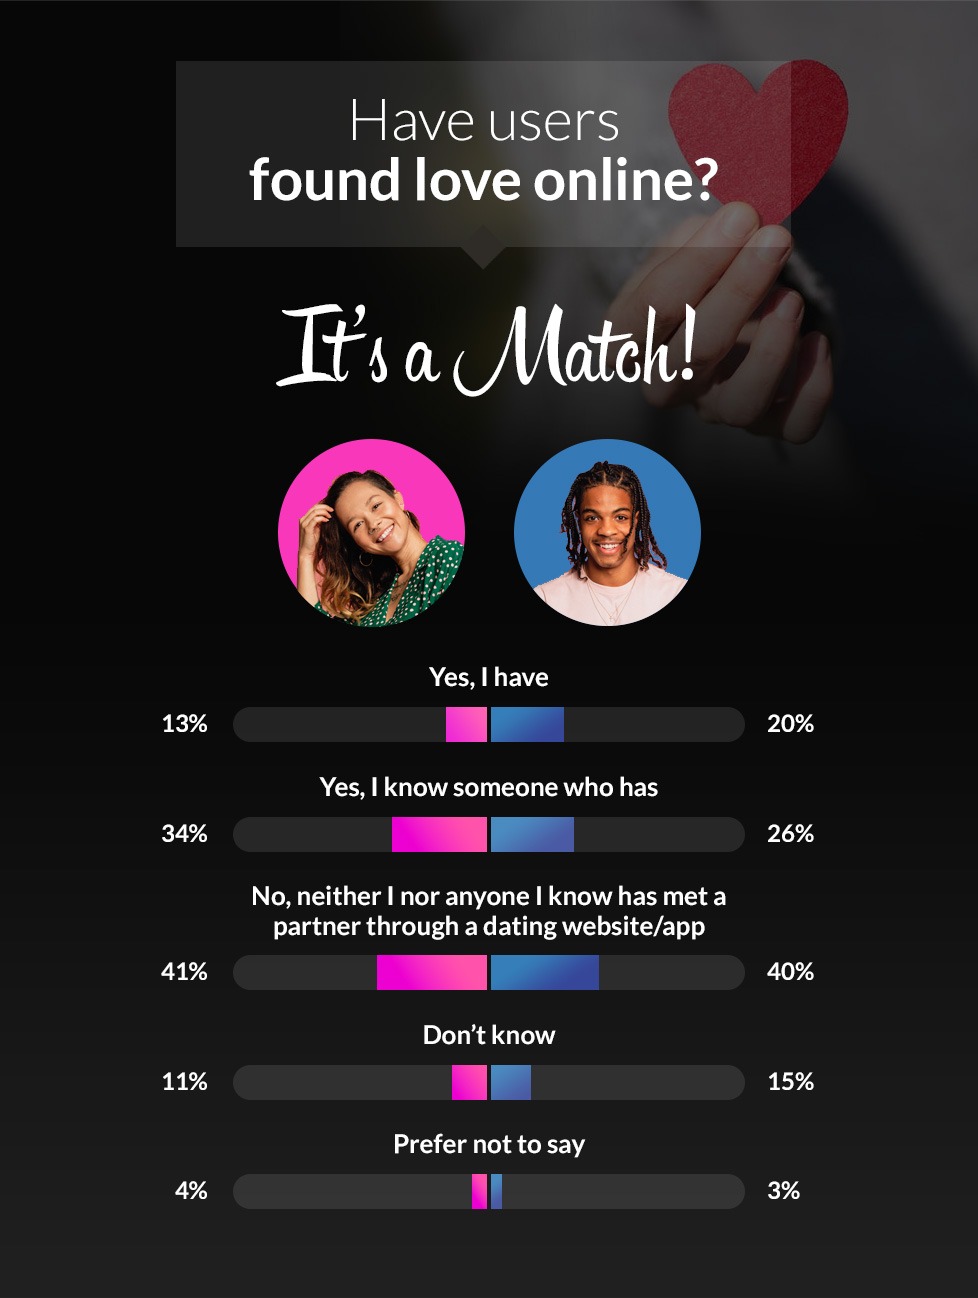 Internet dating: 10 things I’ve learned from looking for love online